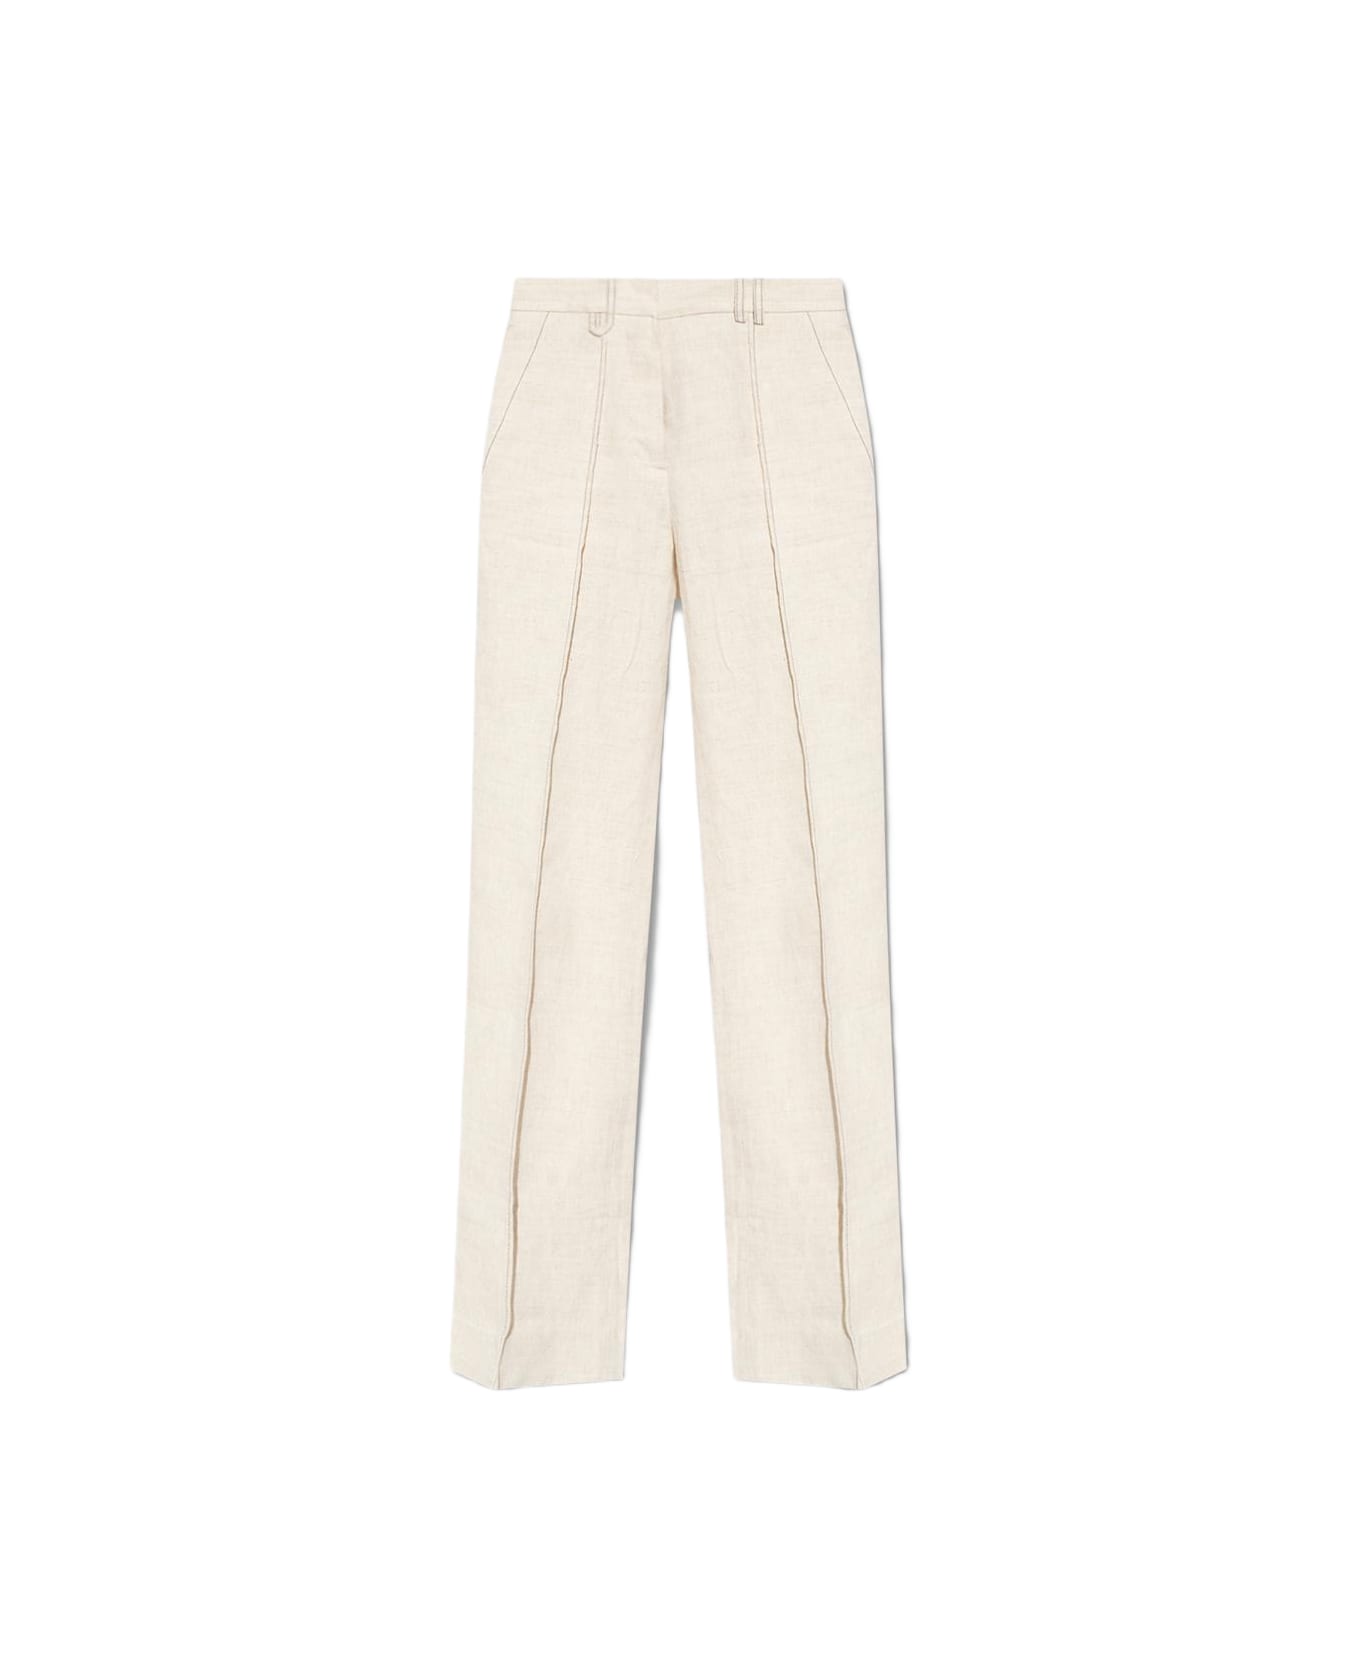 Jacquemus 'camargue' Pleat-front Trousers - BEIGE ボトムス